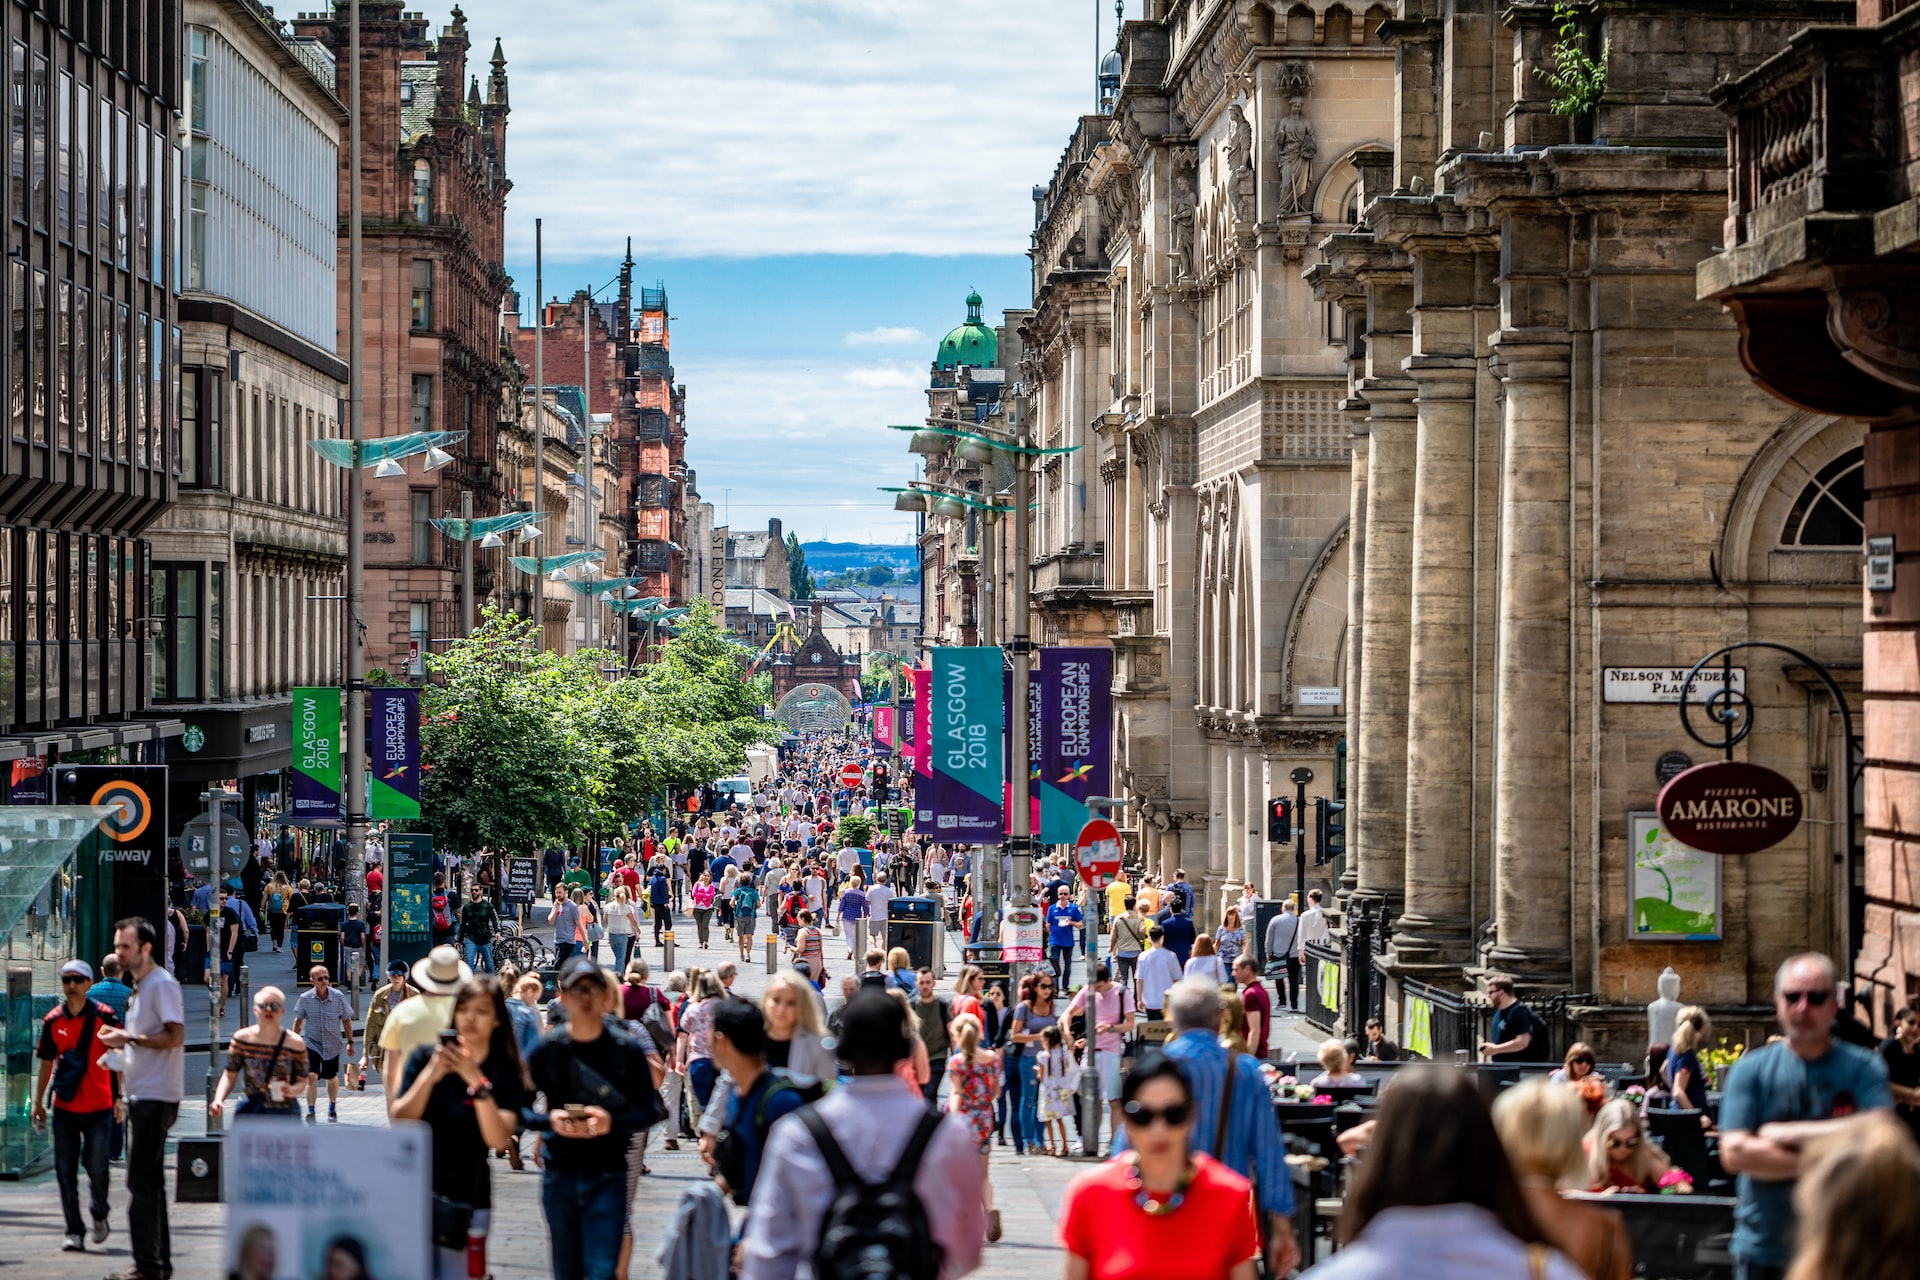 Sunny day on Glasgow's Buchanan Street, full of shops and people walking around.